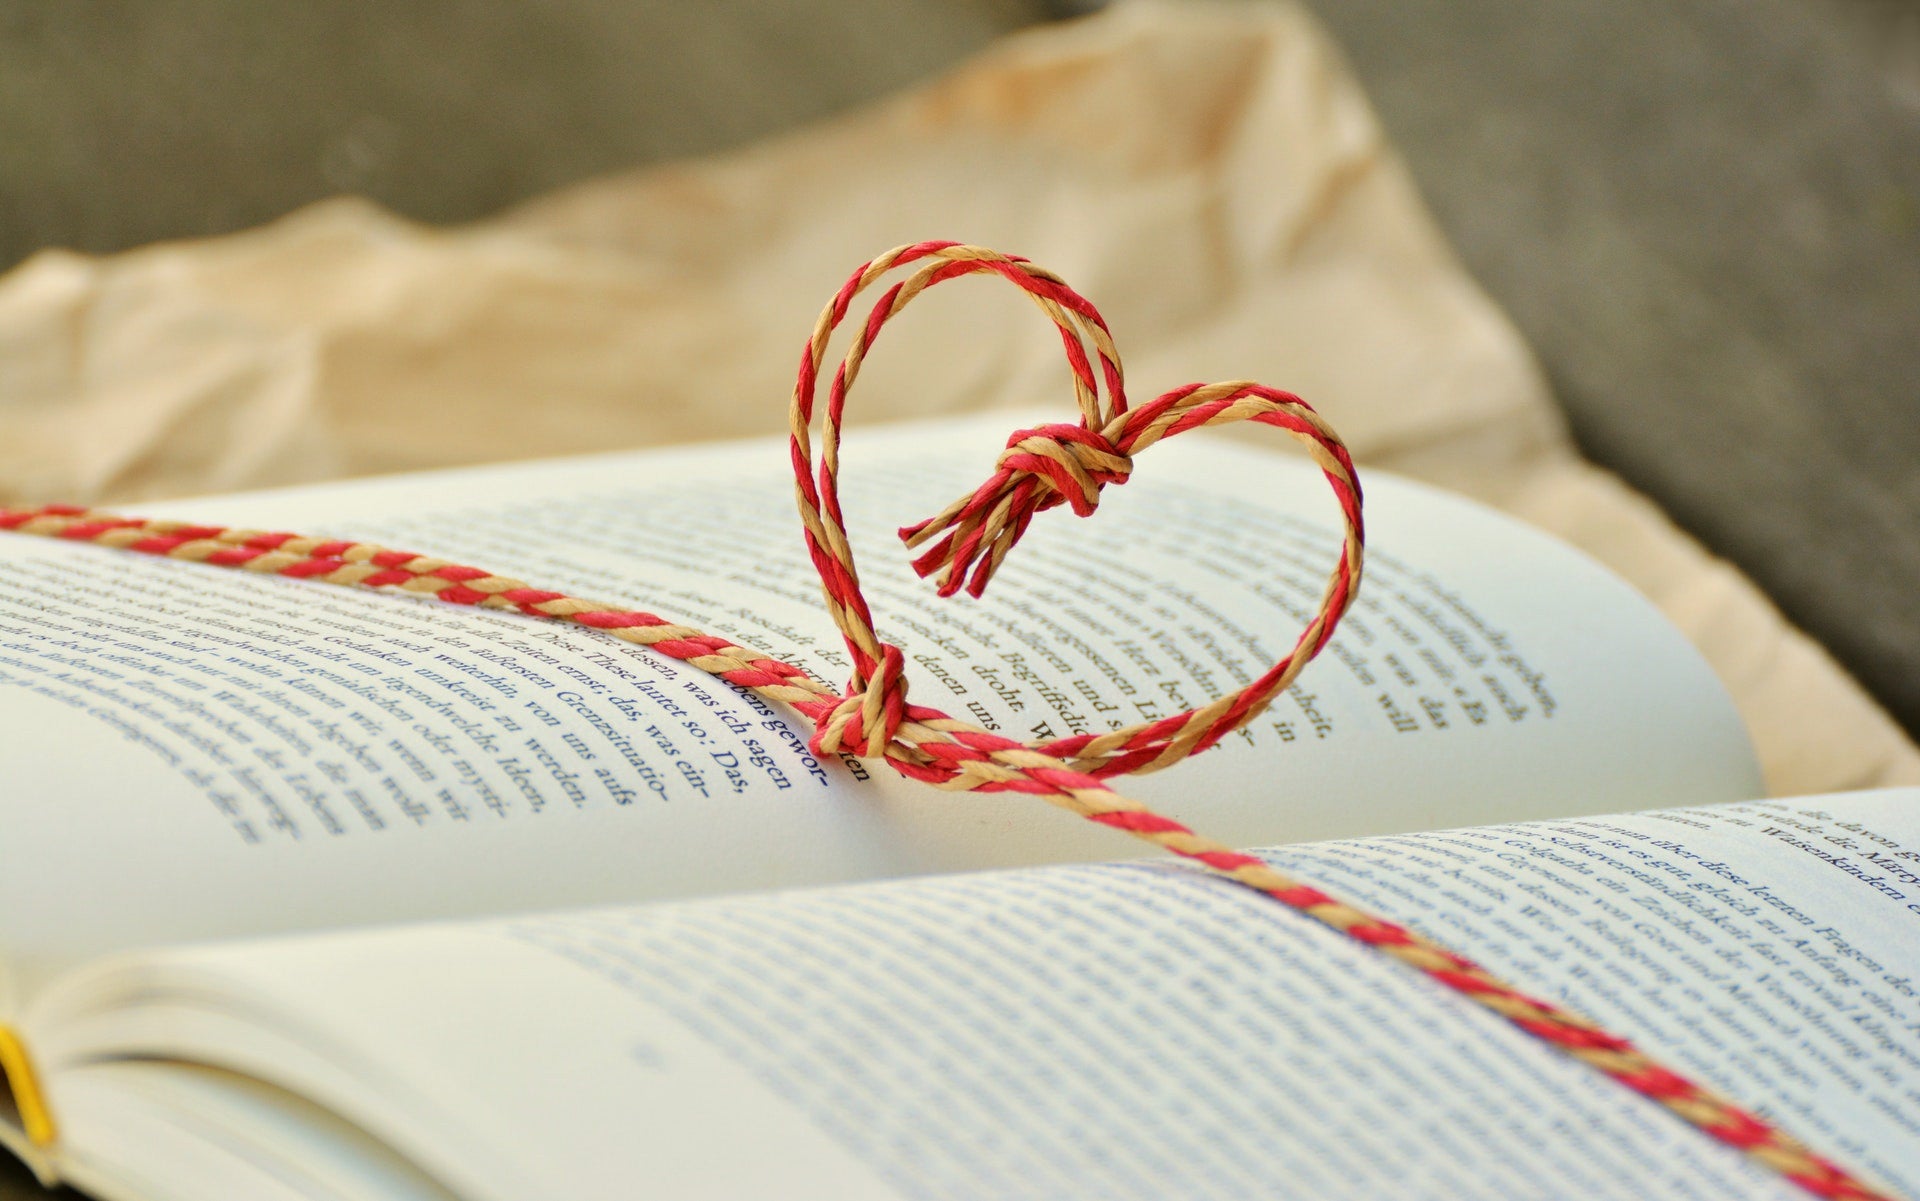 Top 5 Books to Treat Yourself this Valentine's Day